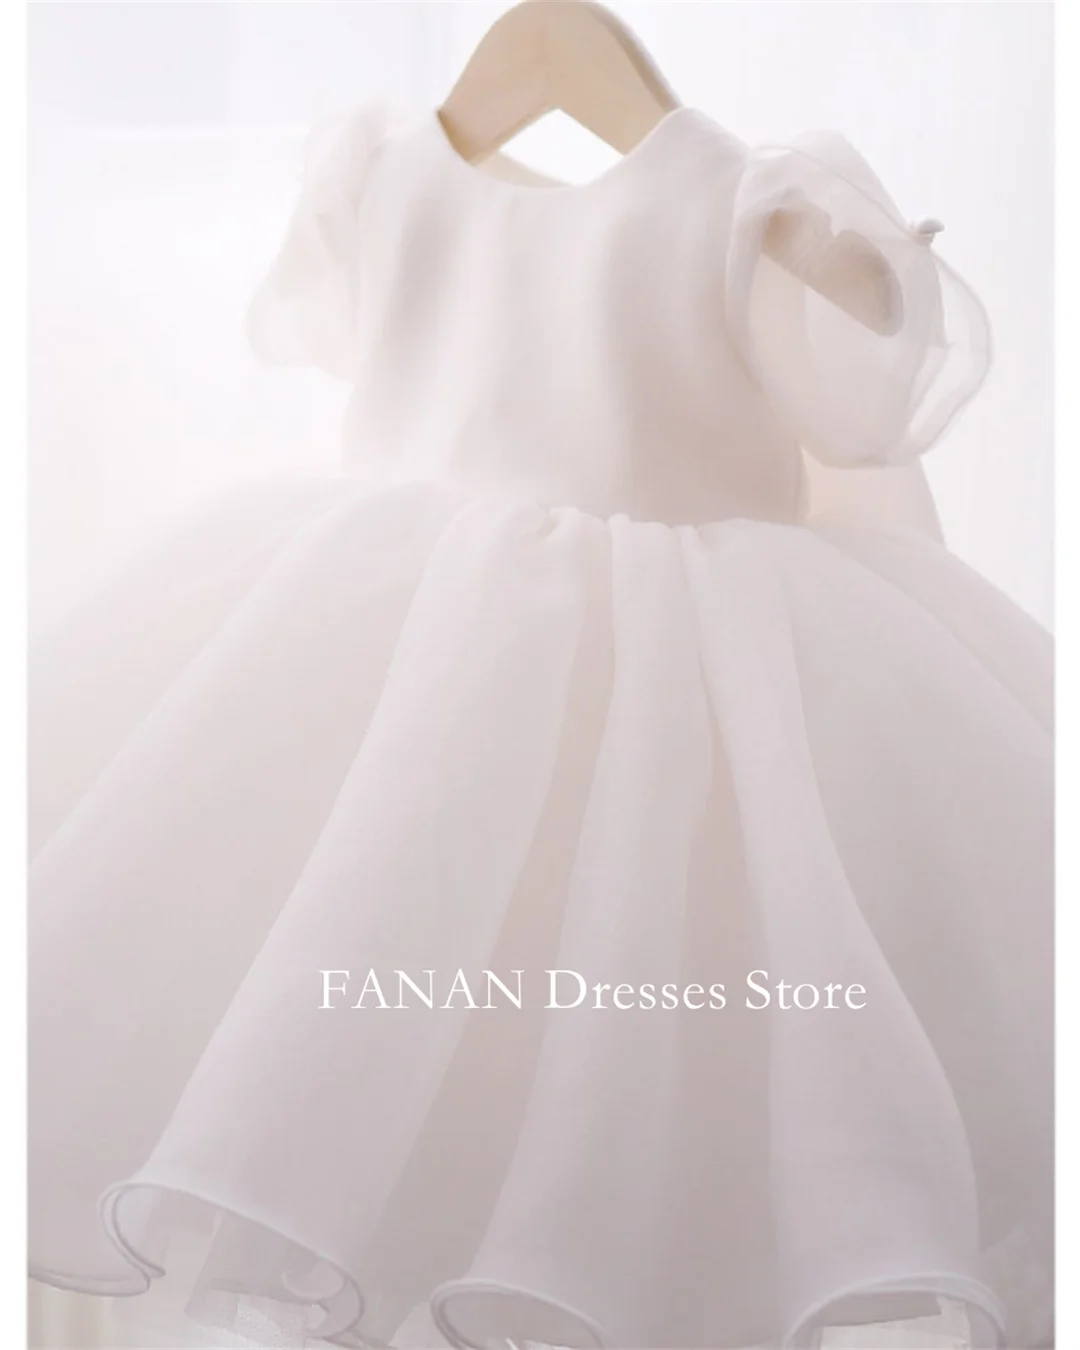 

FANAN Pretty Flower Girl Dresses White Bow Elegant Princess Organza Ball Gown For Kids Birthday Party First Communion Dress